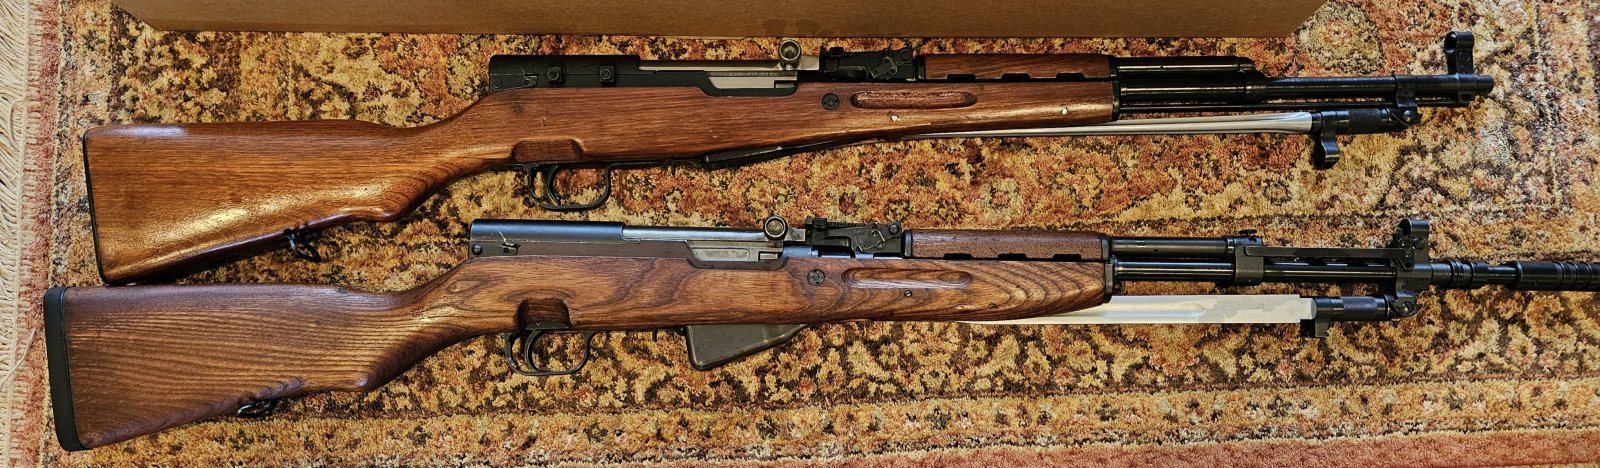 Updated pair of SKS Rifles